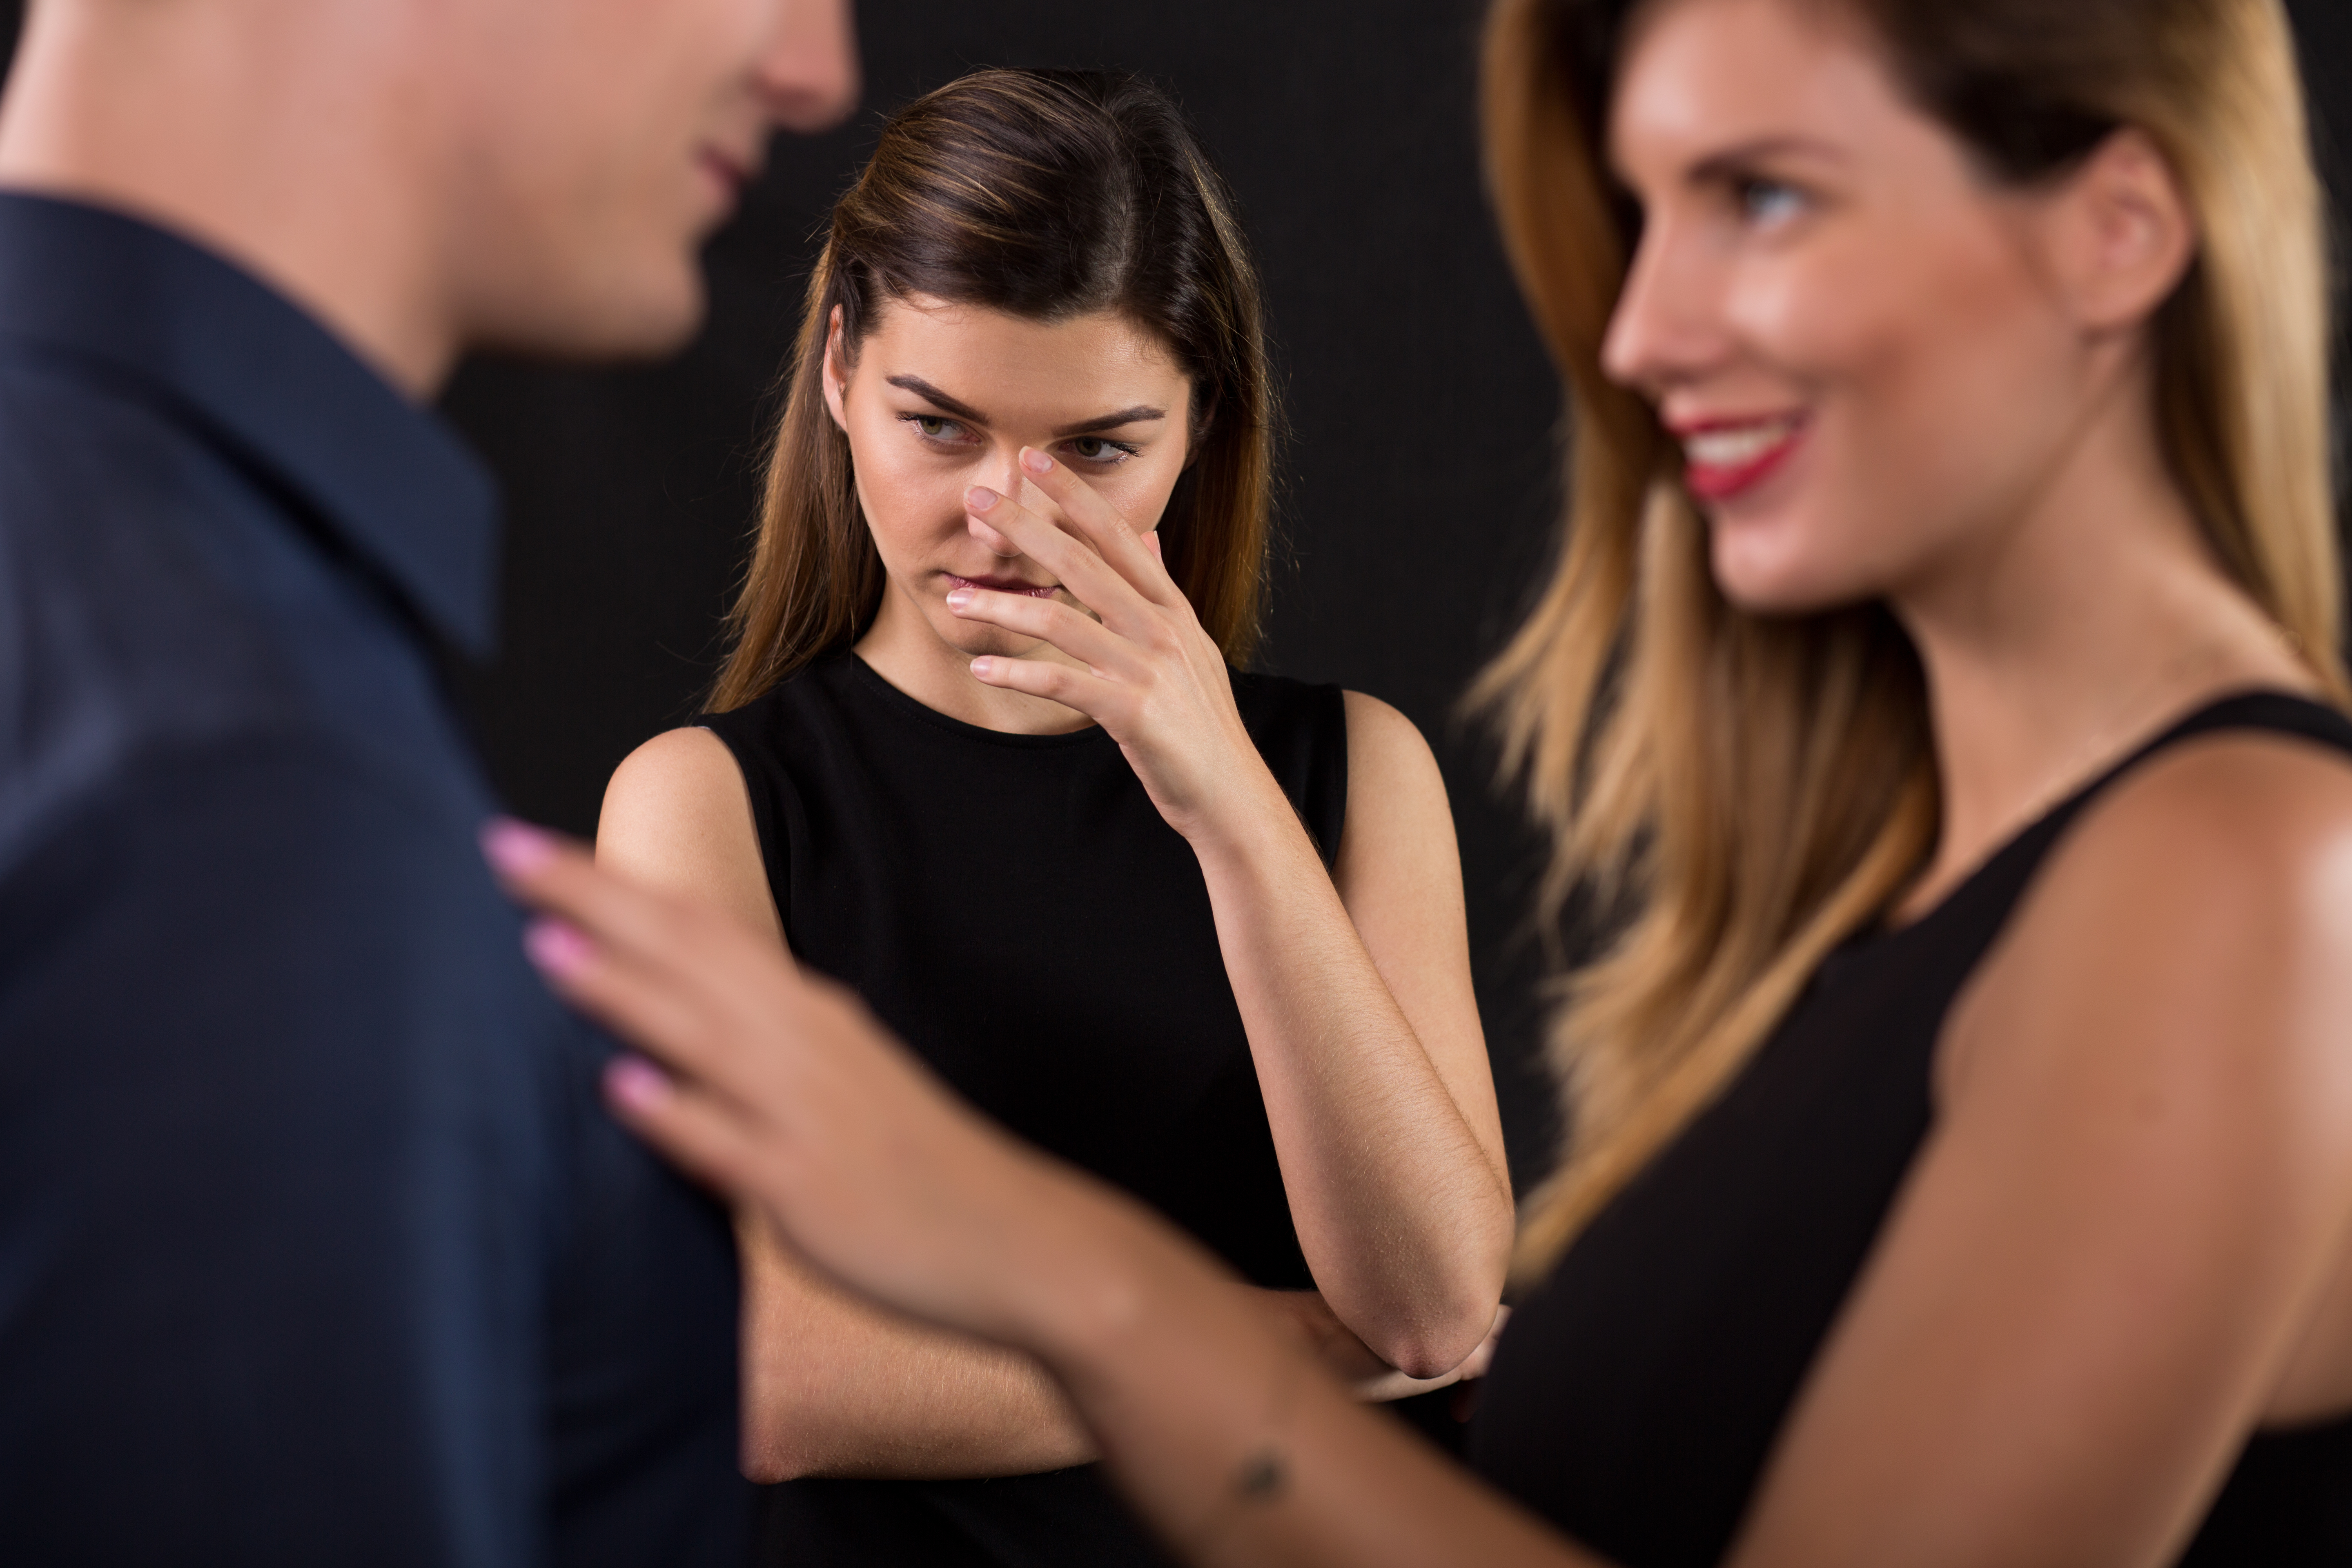 A husband cheating on his wife with another woman | Source: Shutterstock